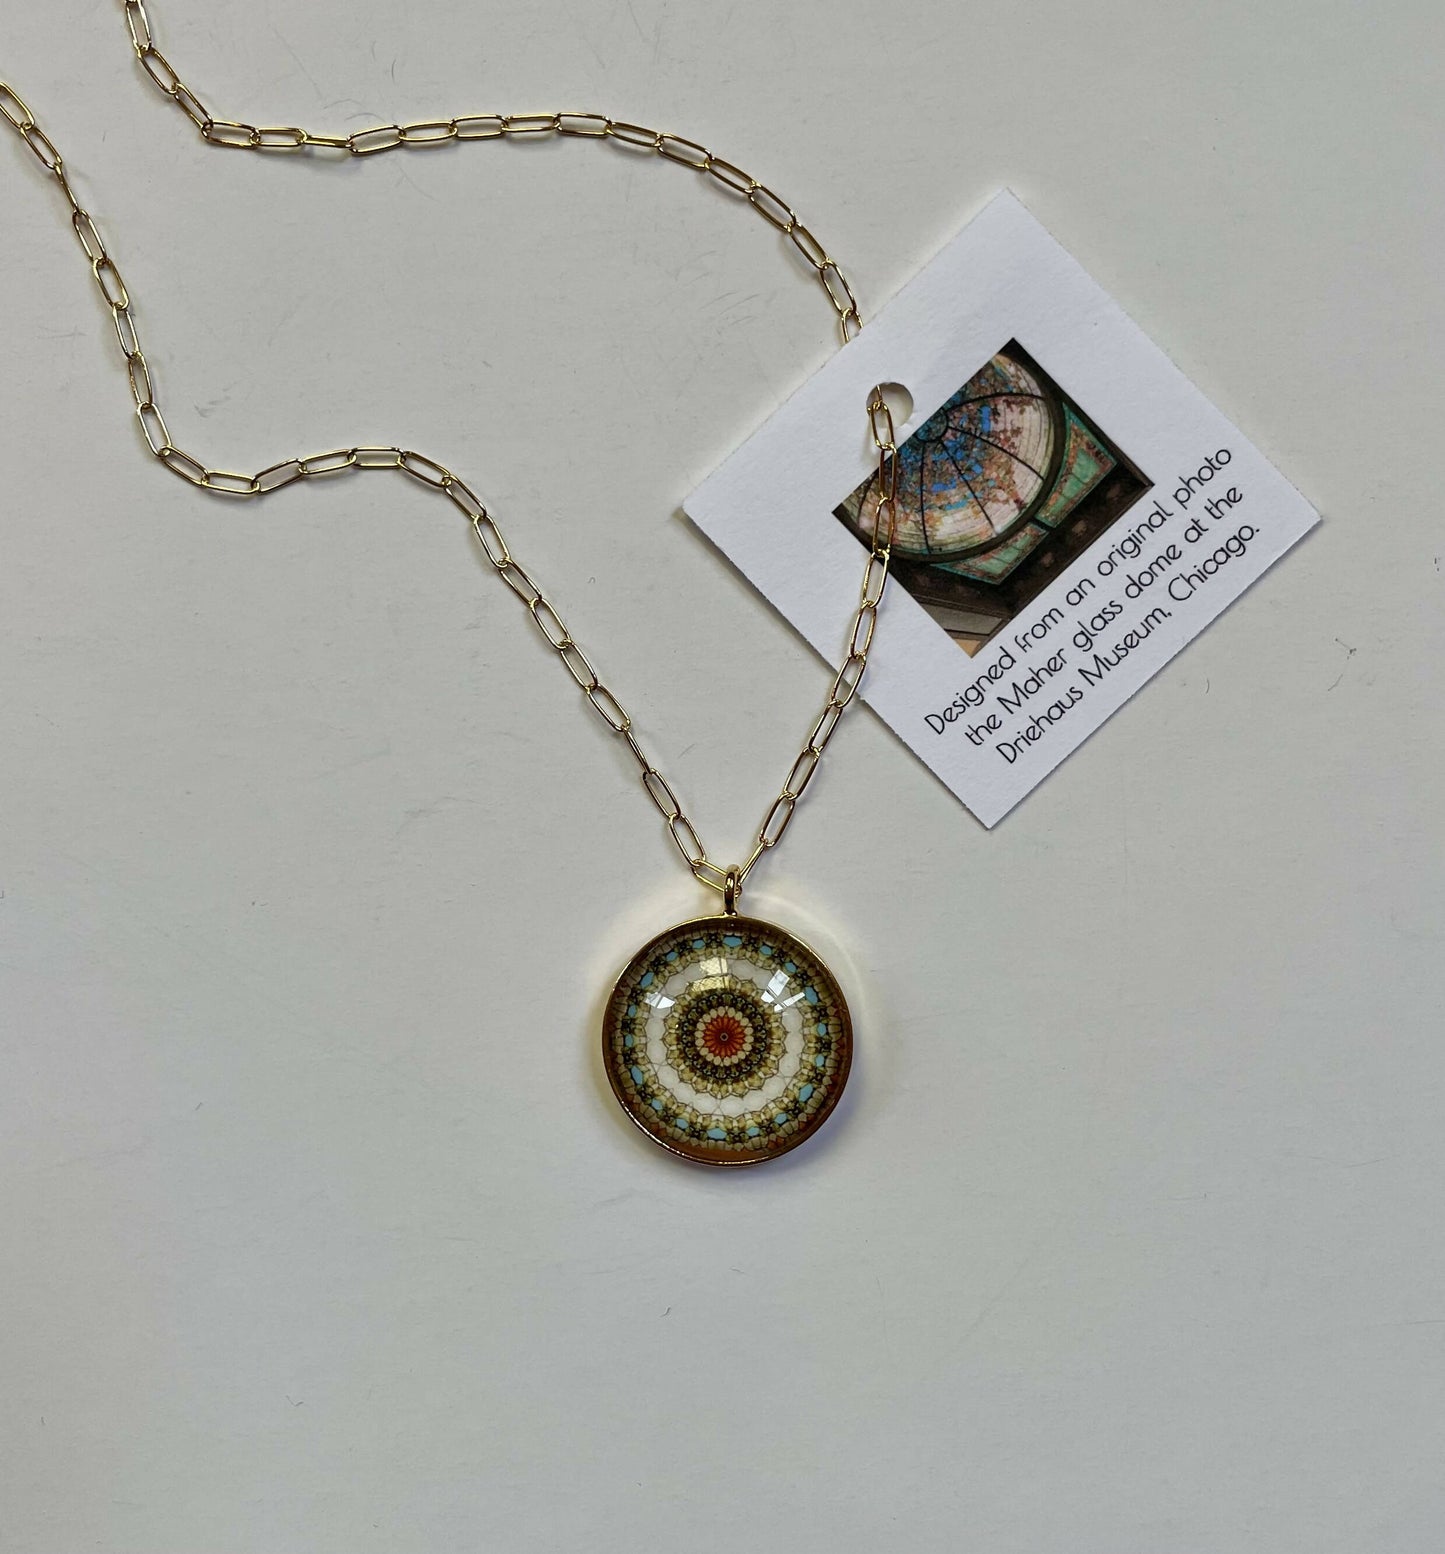 Driehaus Dome Necklace